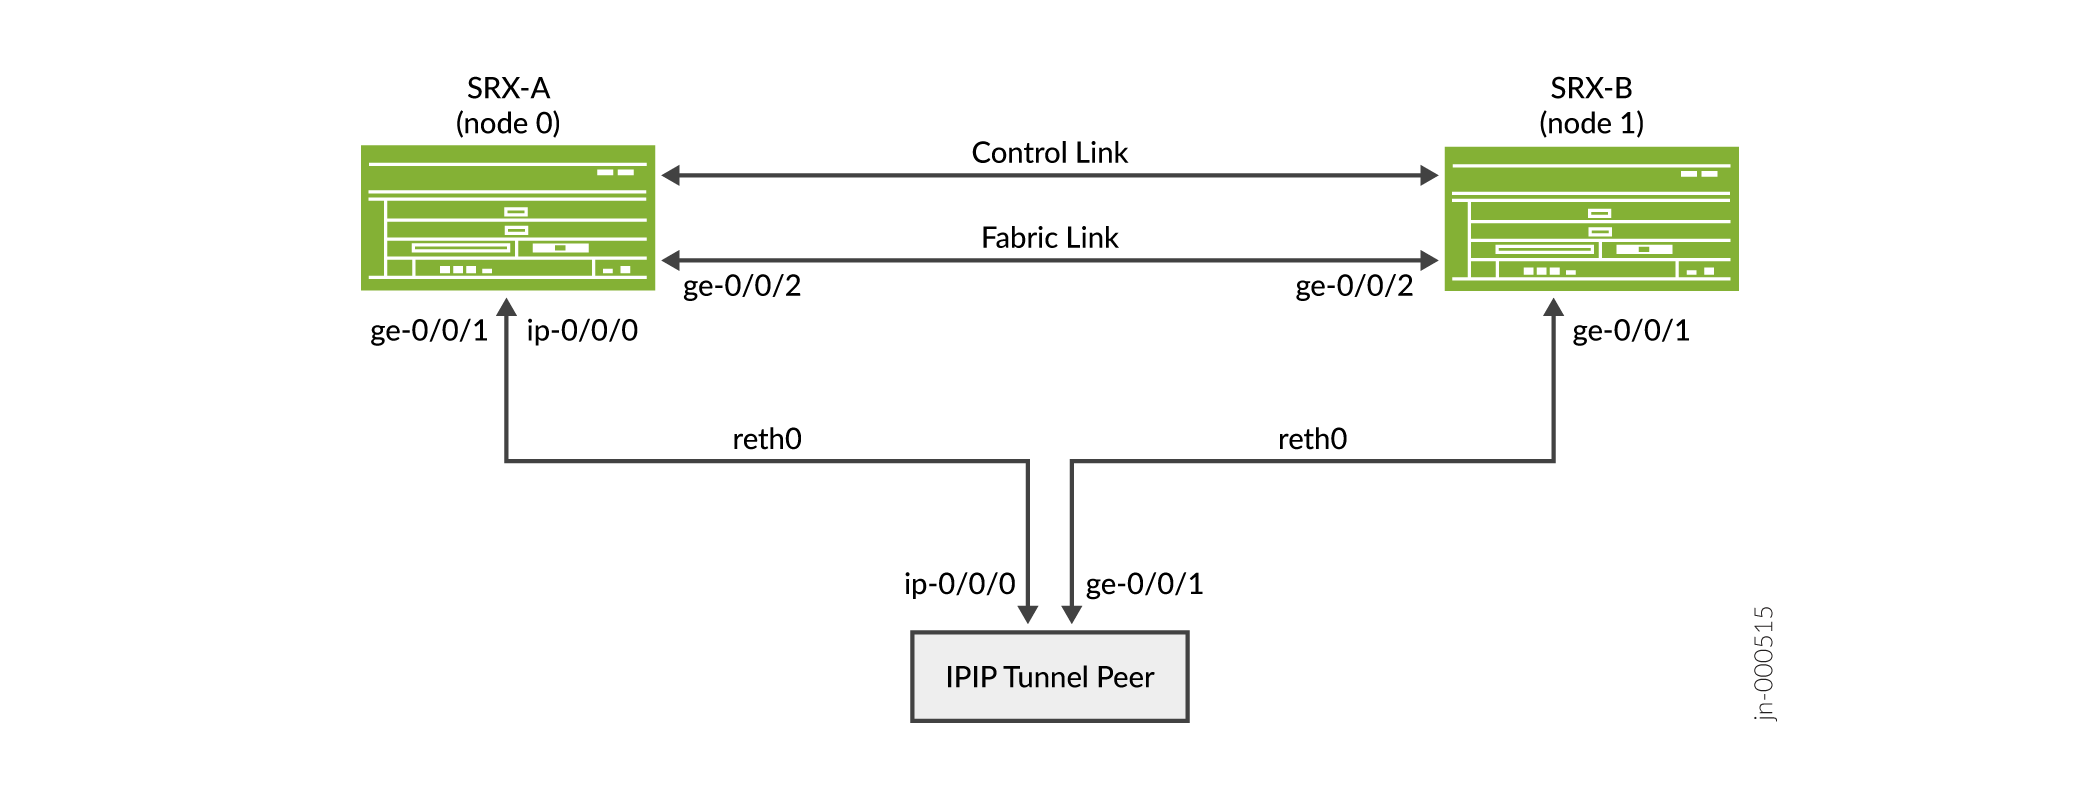 Configuring SRX Series devices using IP-IP Tunnel